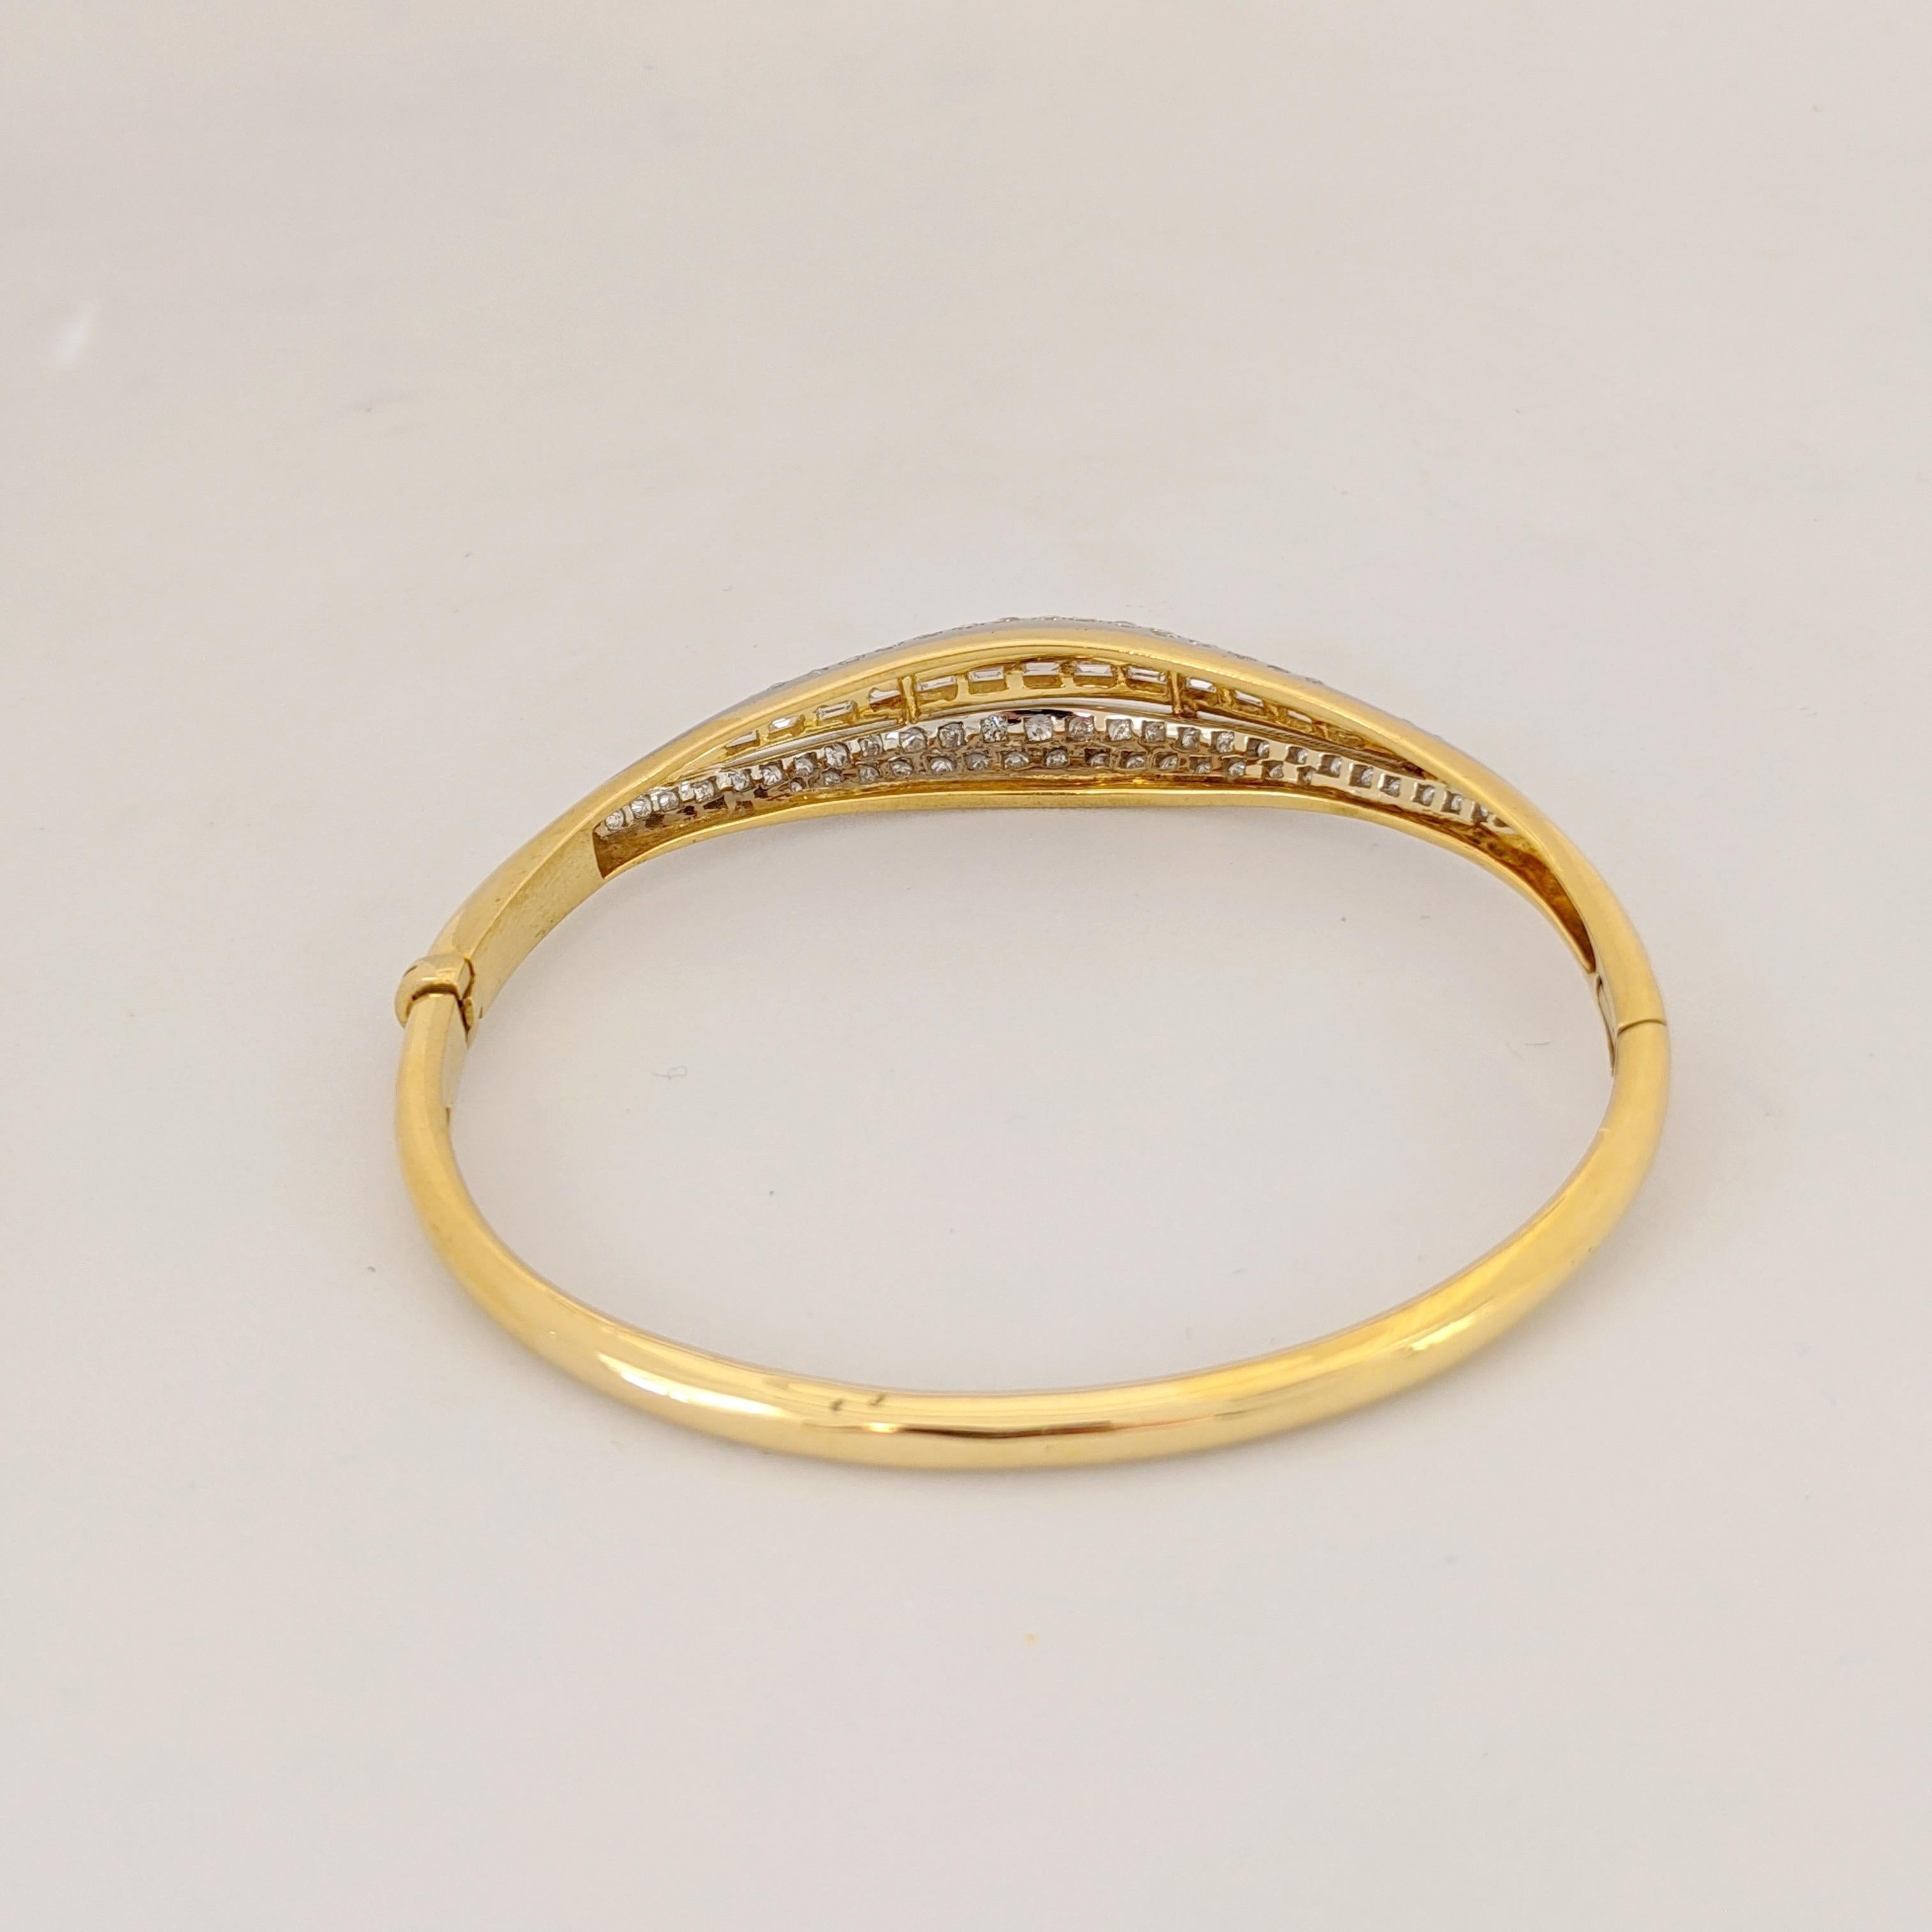 Round Cut 18 KT YG/WG Bangle Bracelet with 3.40 Carat Round and Baguette Diamonds For Sale